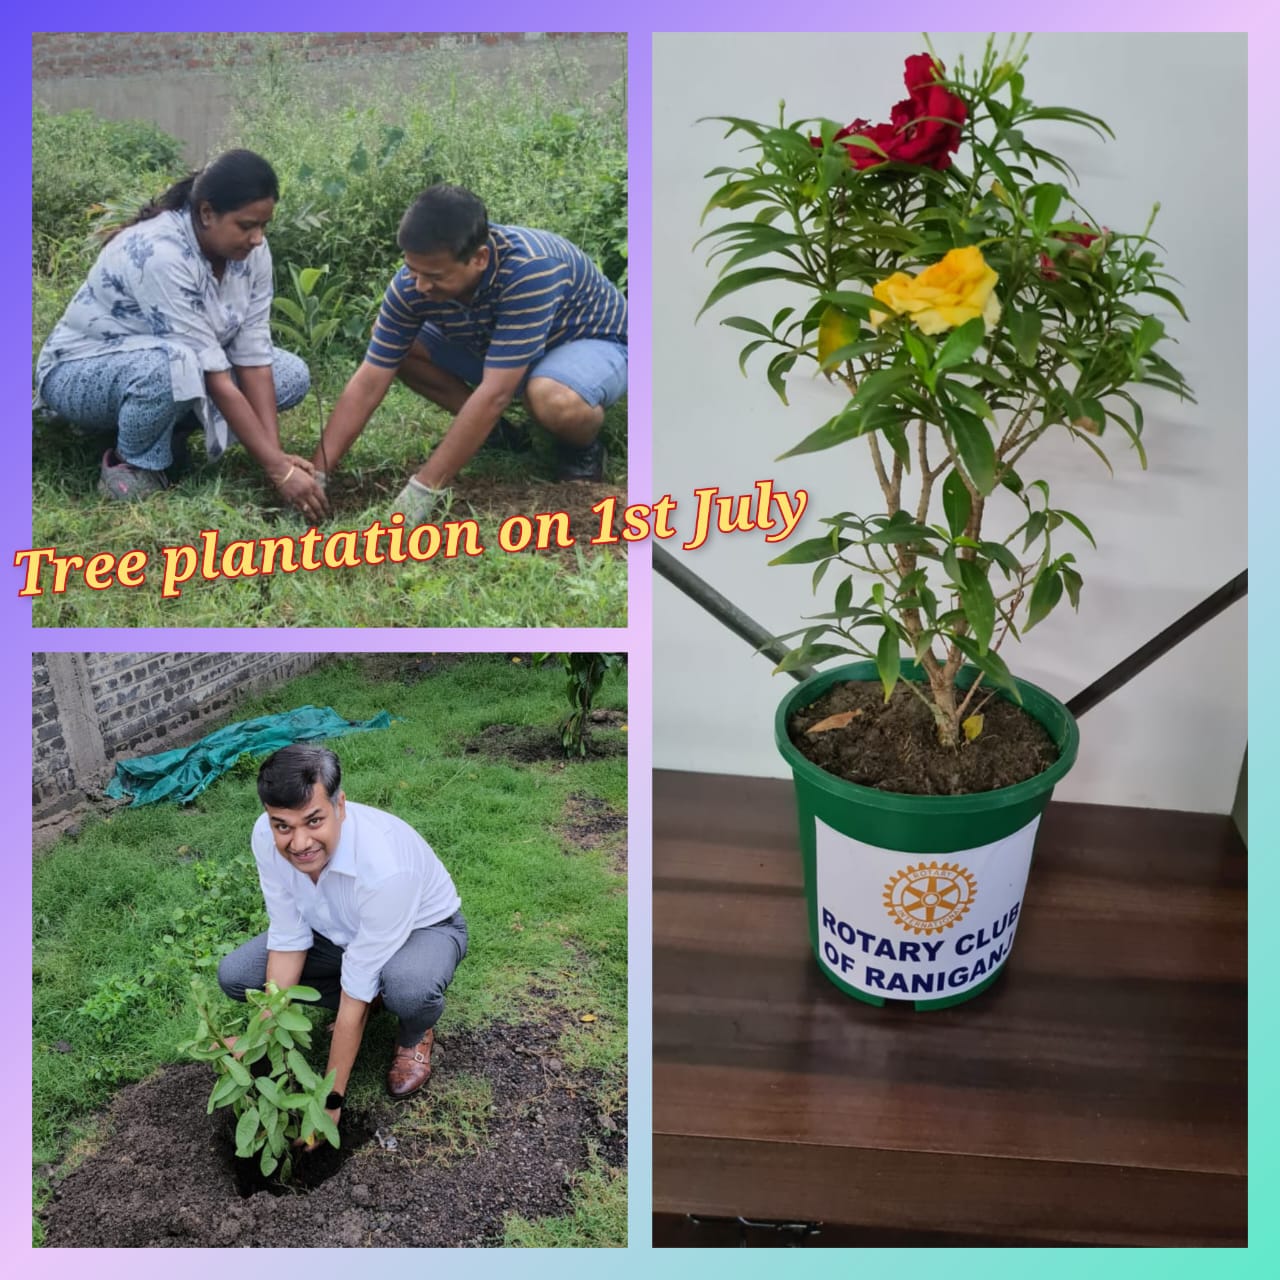 Tree Plantation Program undertaken by our club members at their own premises on 1st July